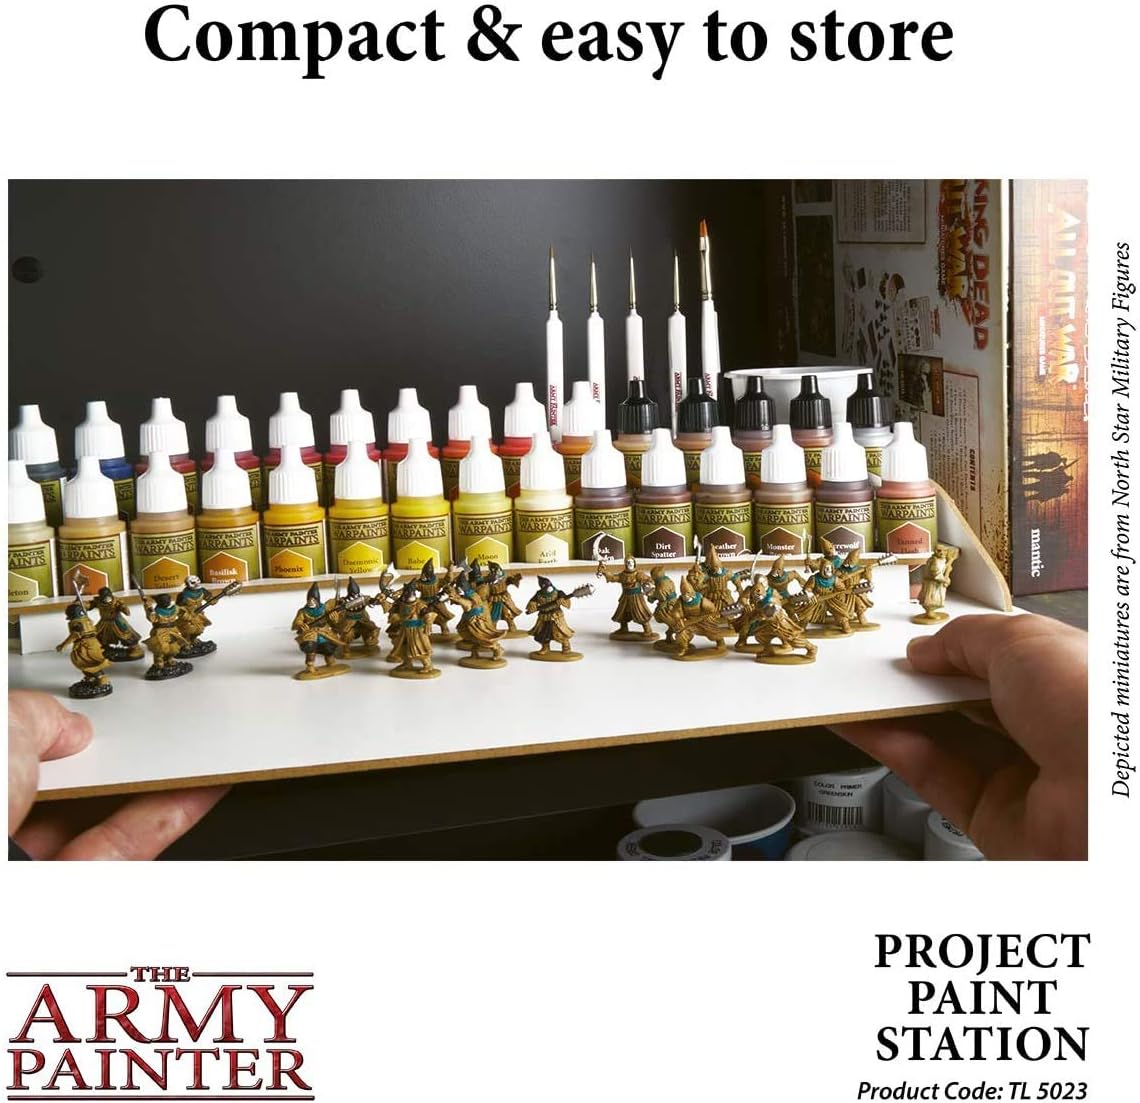 Project Paint The Army Painter Model Paint Stand & Paint Brush Holder -Dropper Bottle Paint Rack, Paint Station with Brush Organizer-Paint Organizer for Acrylic Painting for 30 Warpaints, 7 Paintbrushes & Water Cup